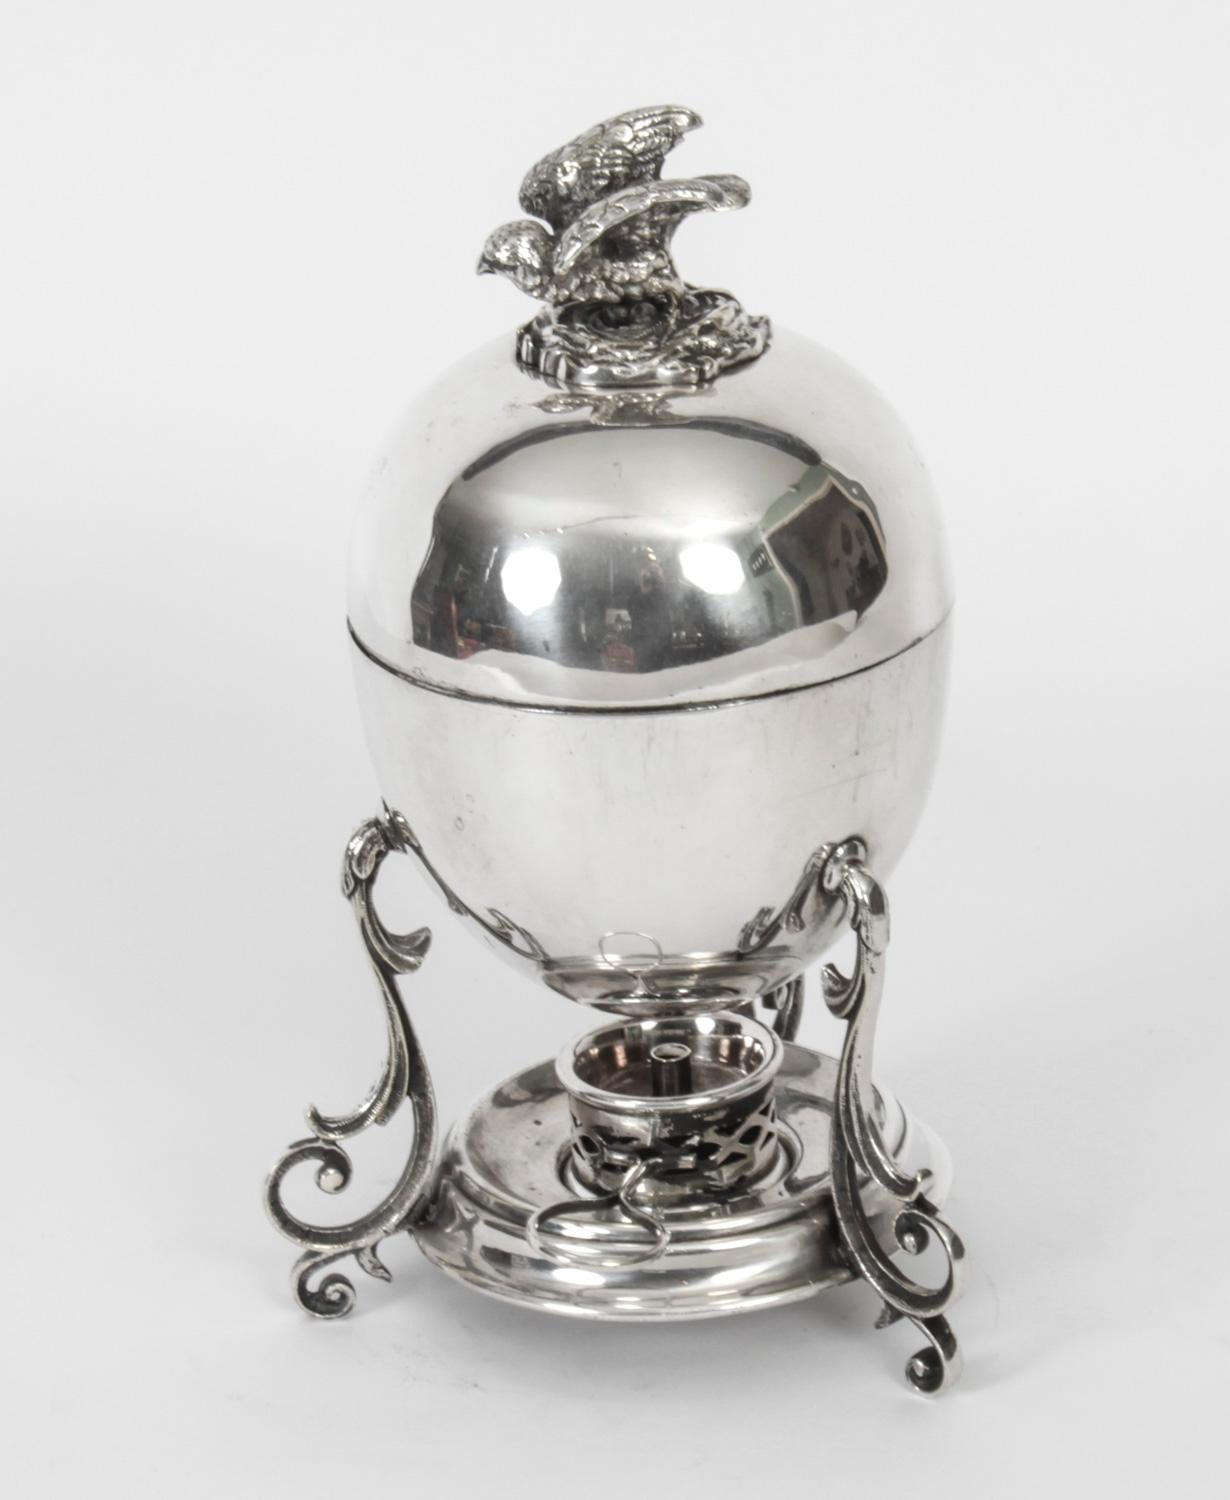 Antique Victorian Silver Plated Egg Coddler / Boiler, 19th Century 7